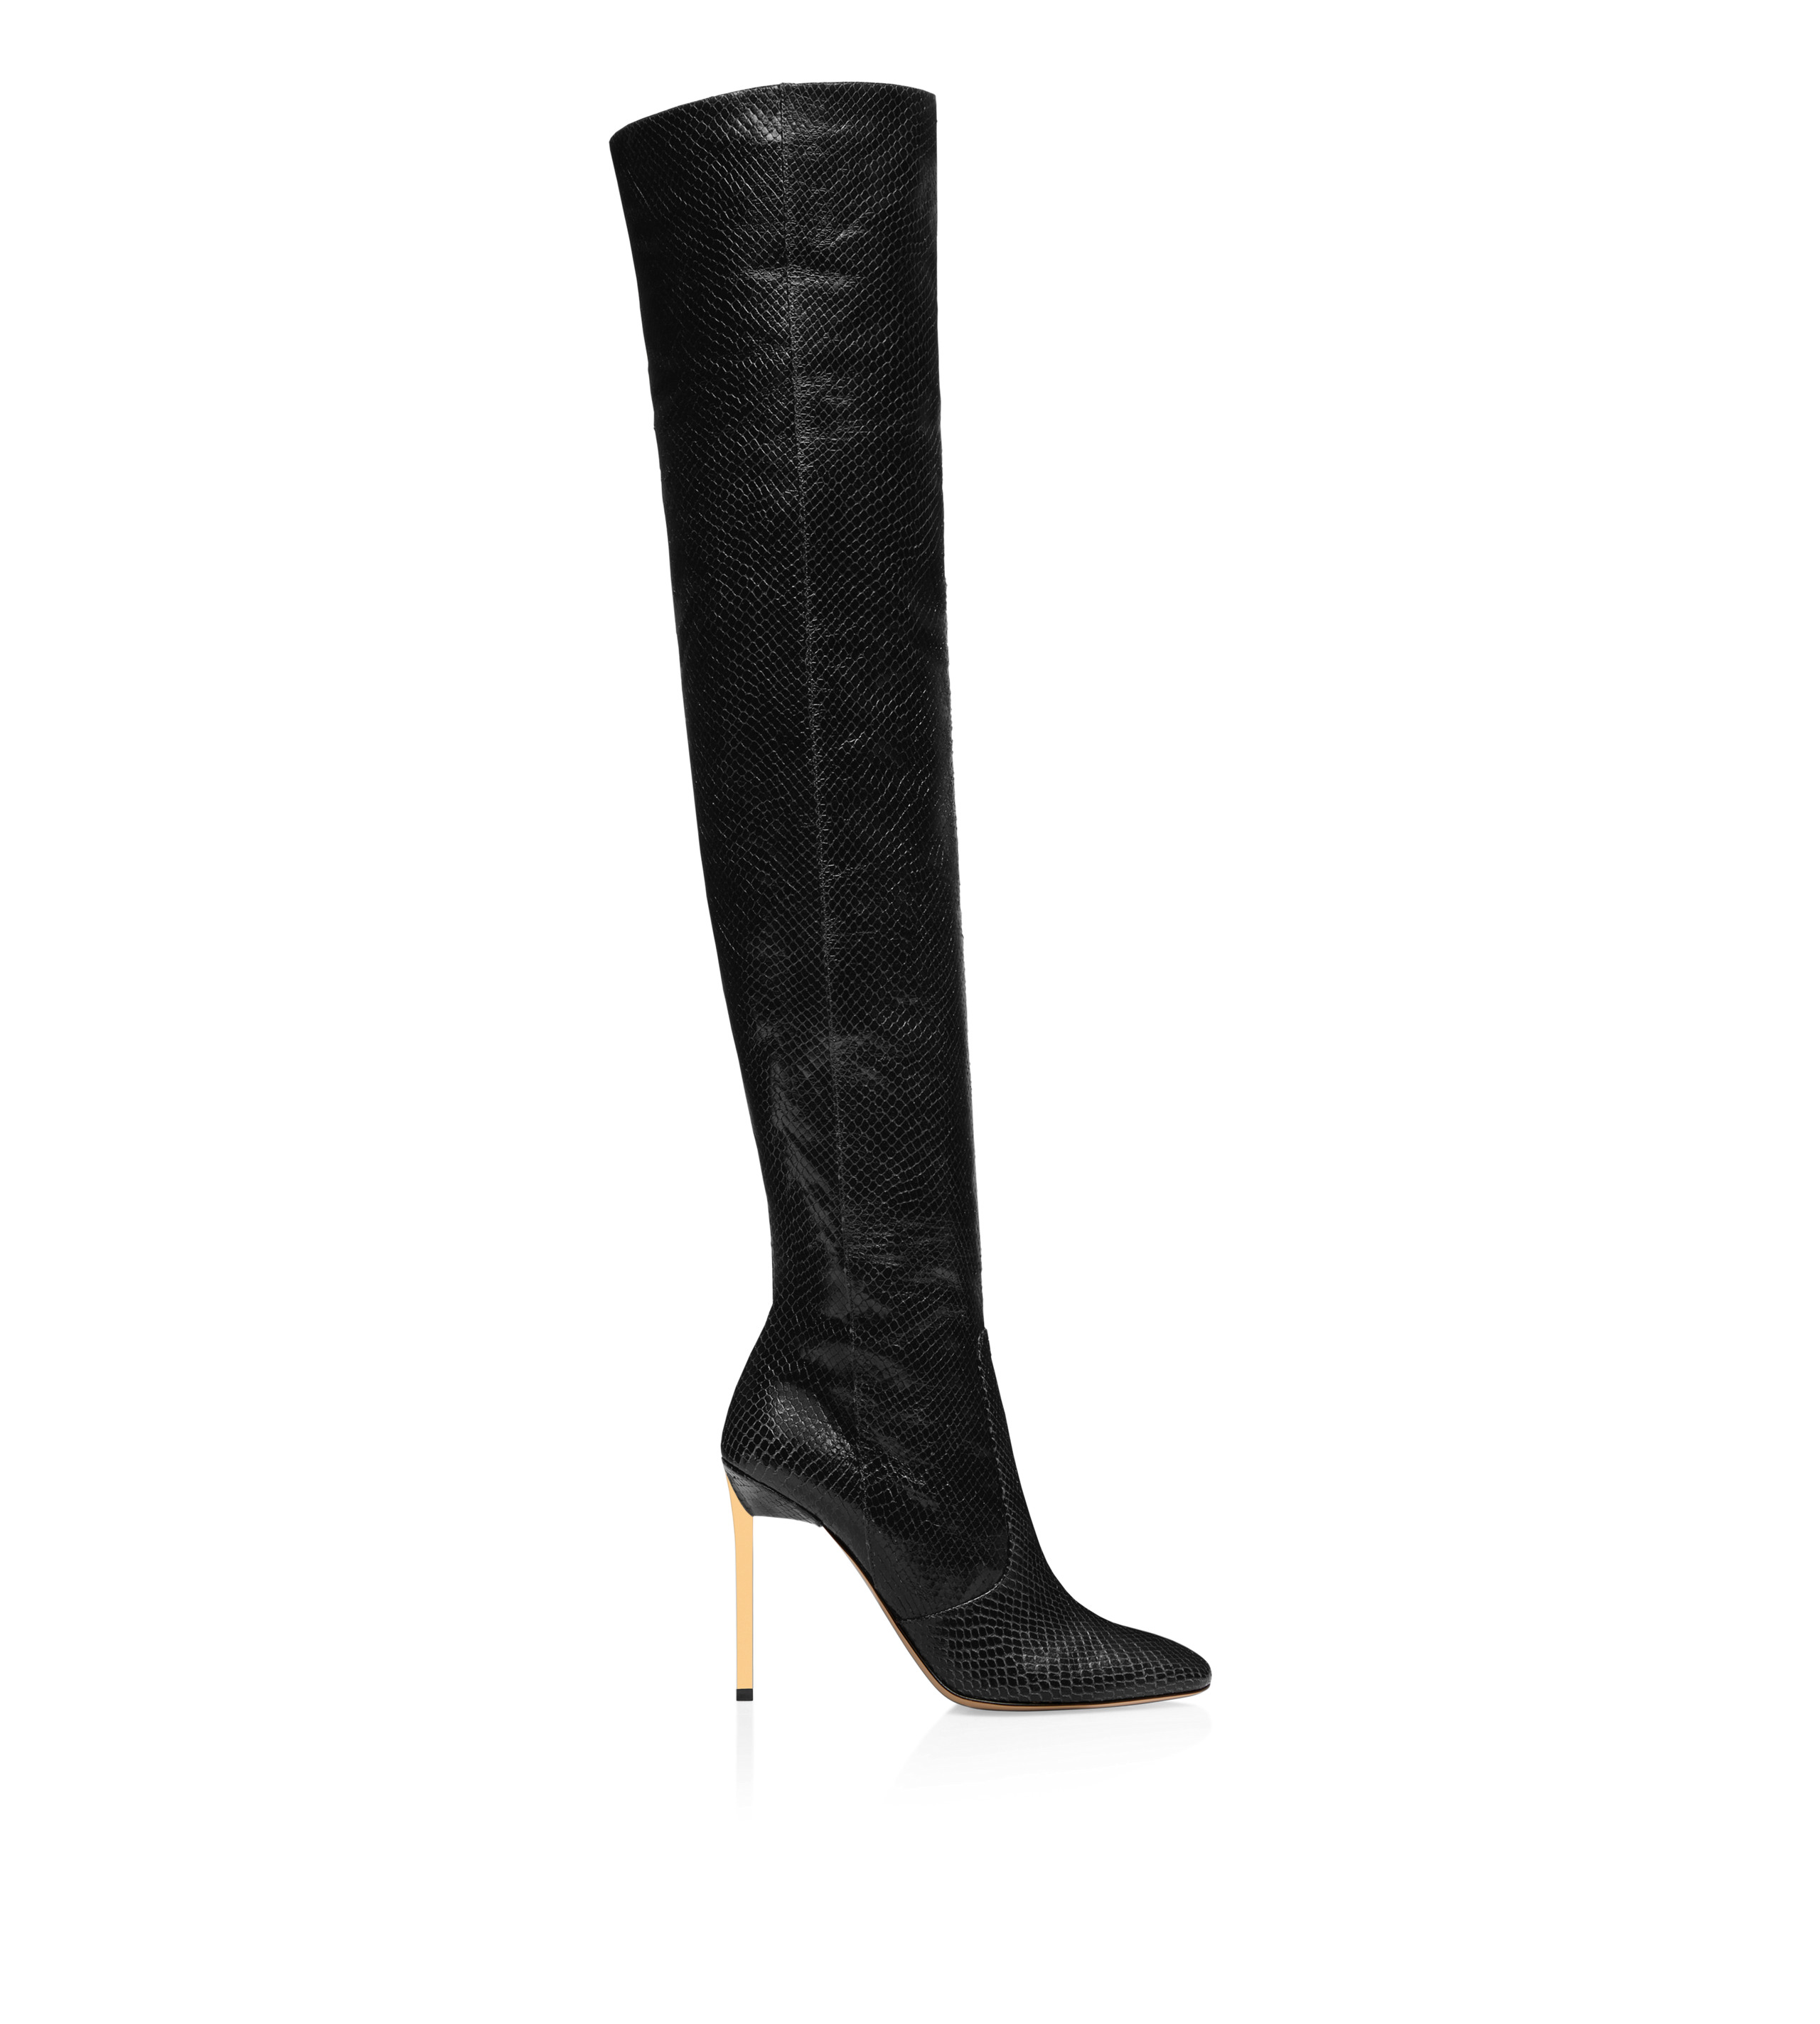 STAMPED PYTHON LEATHER CARINE OVER THE KNEE BOOT - 1